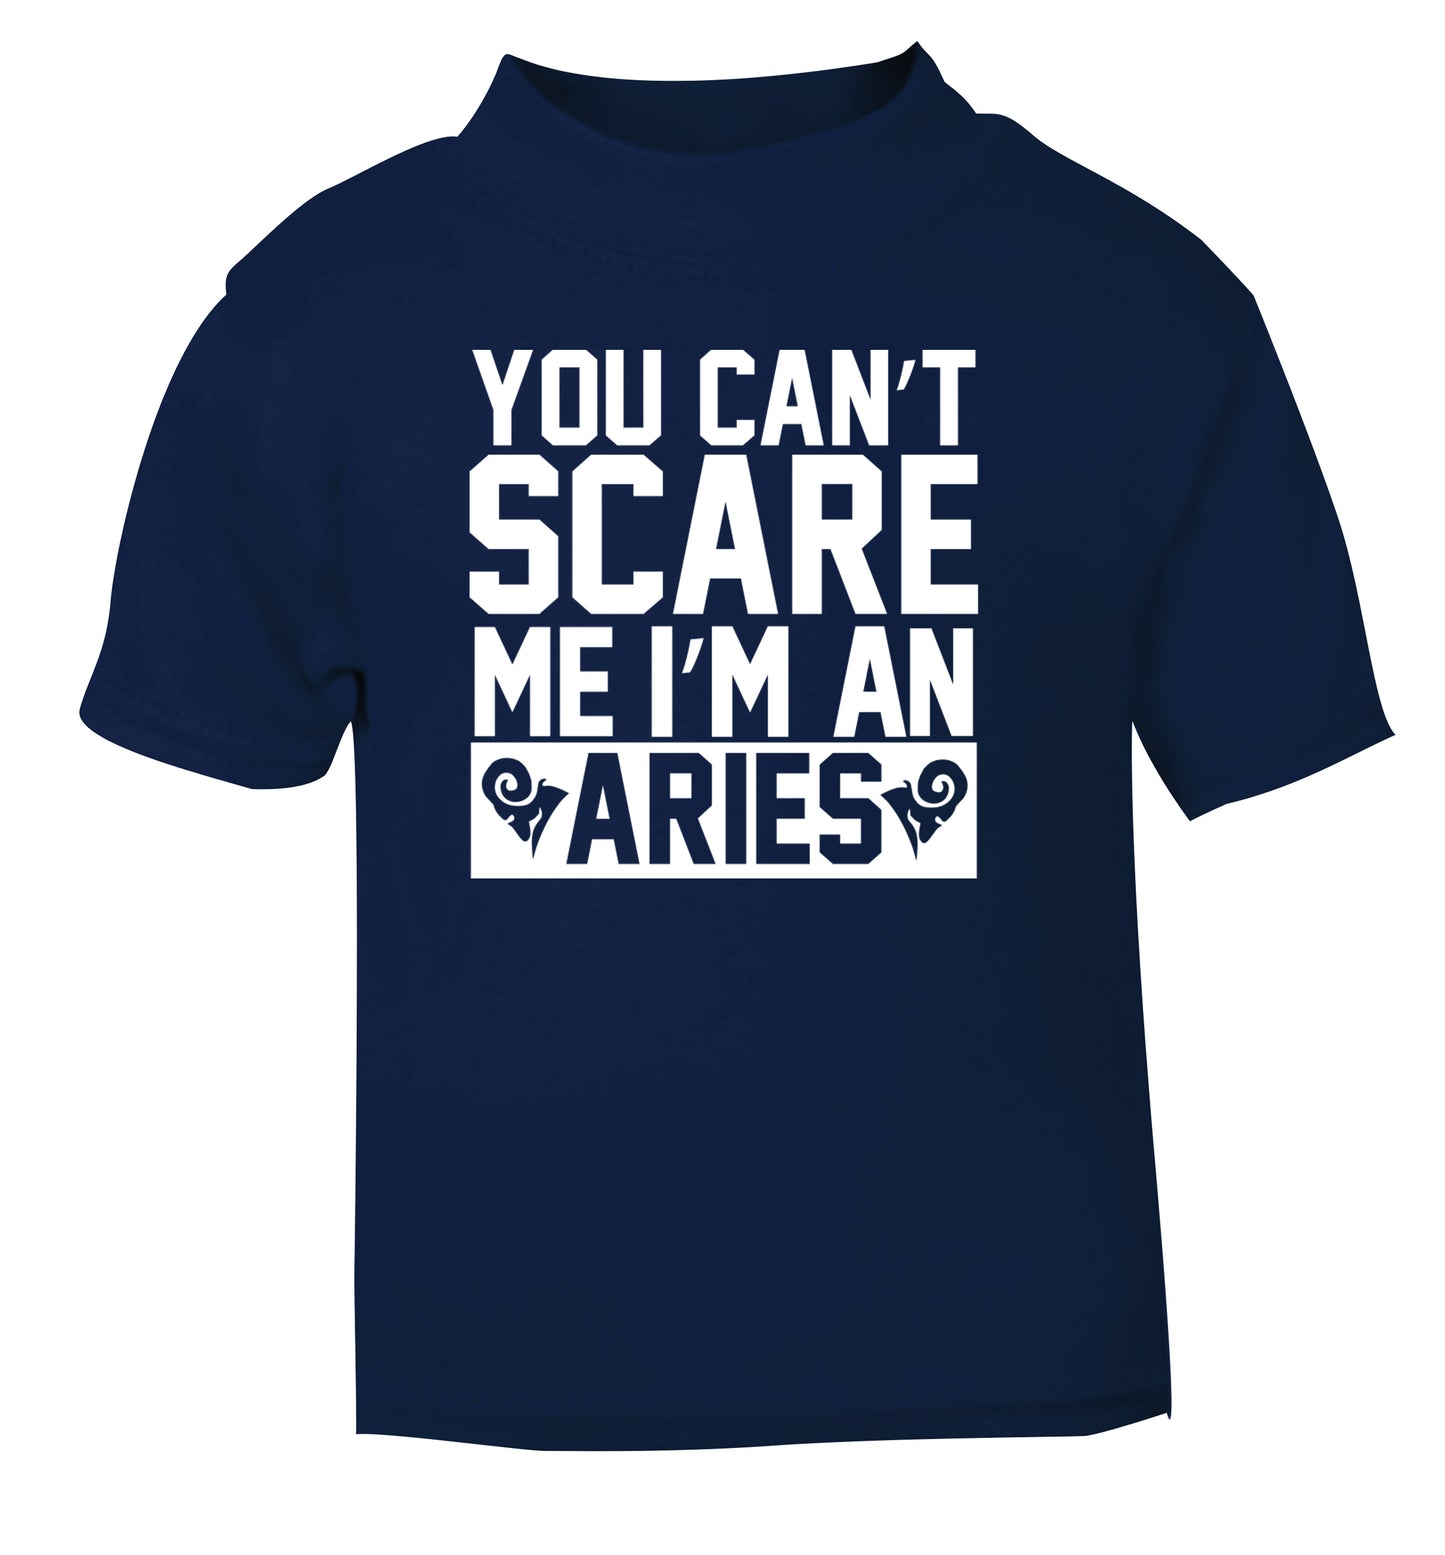 You can't scare me I'm an aries navy Baby Toddler Tshirt 2 Years